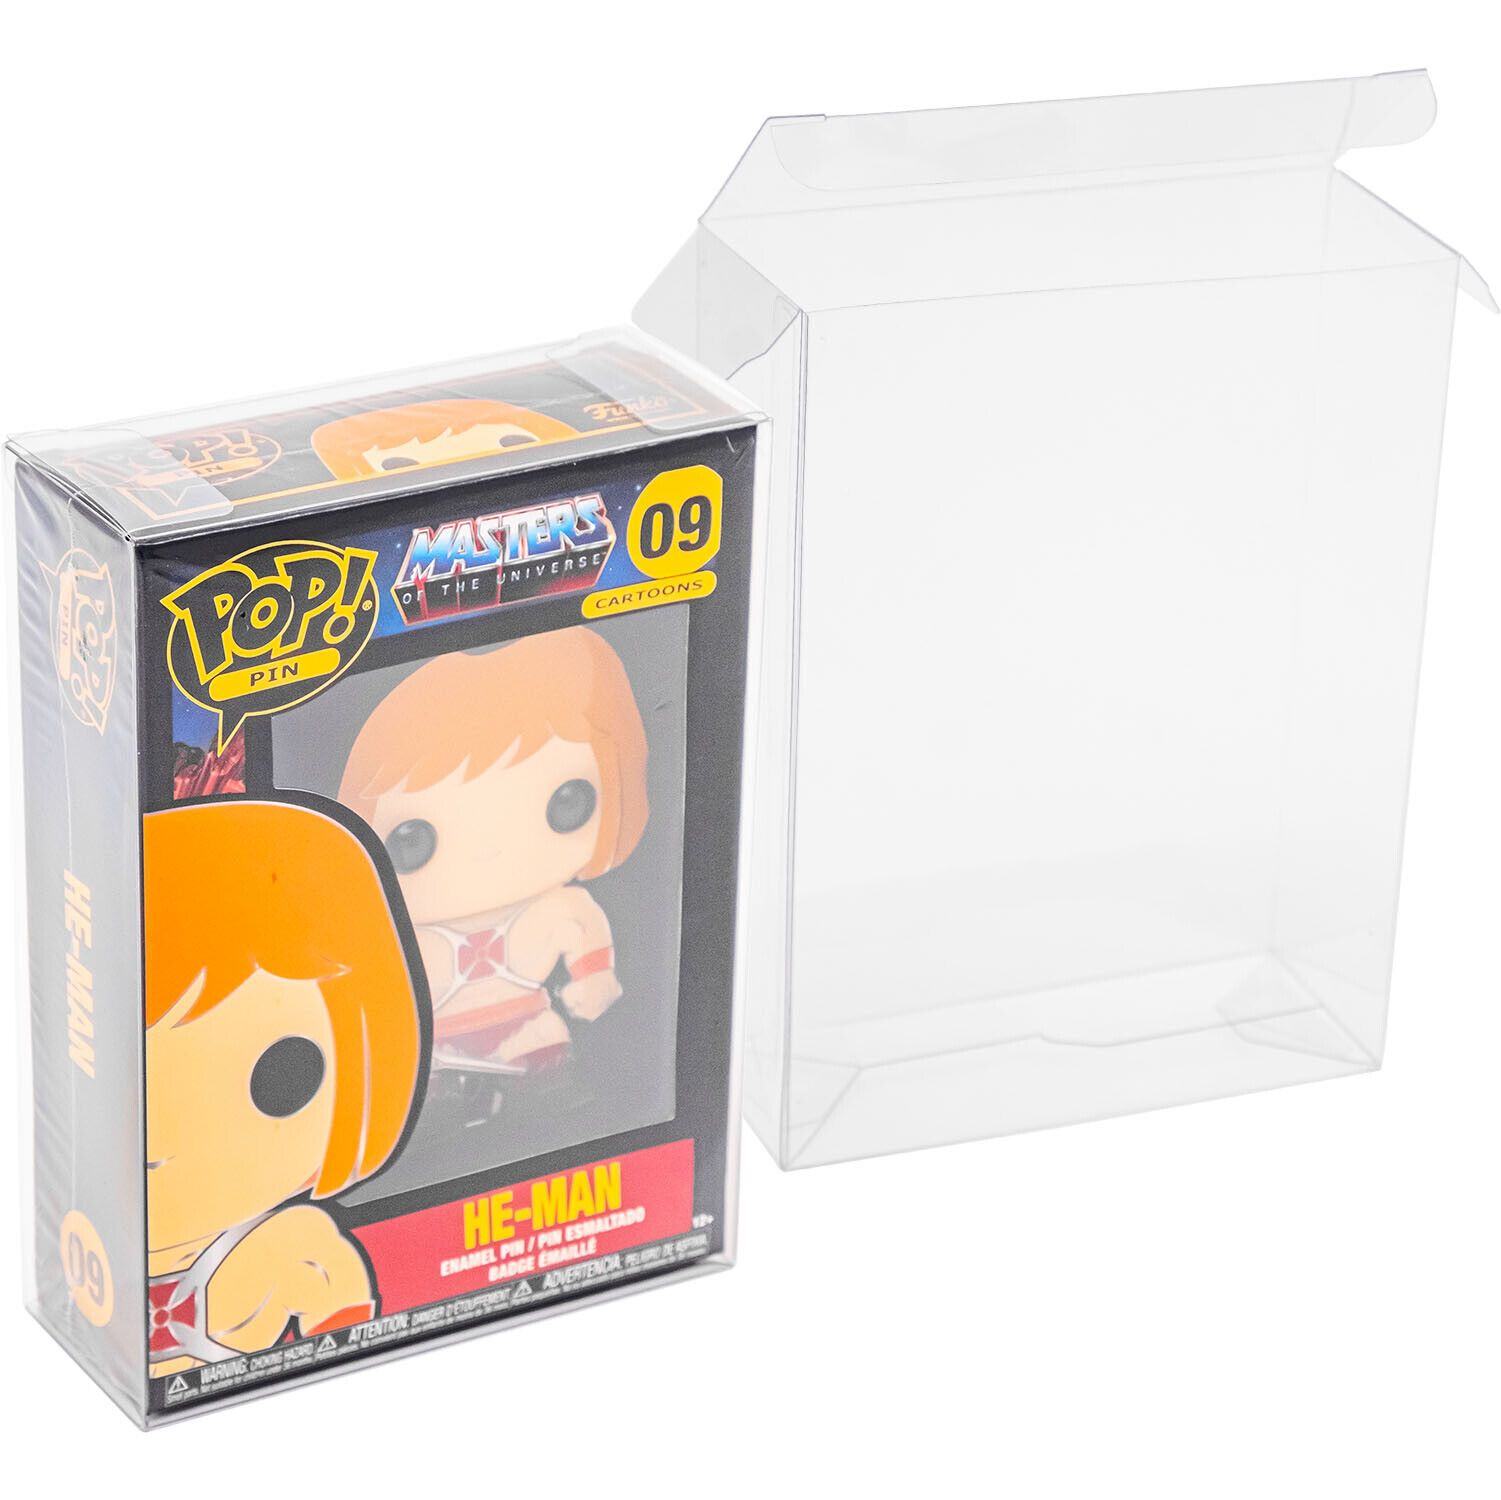 Funko Pop Pin Protector Case for Enamel Pin Boxes Figures Display